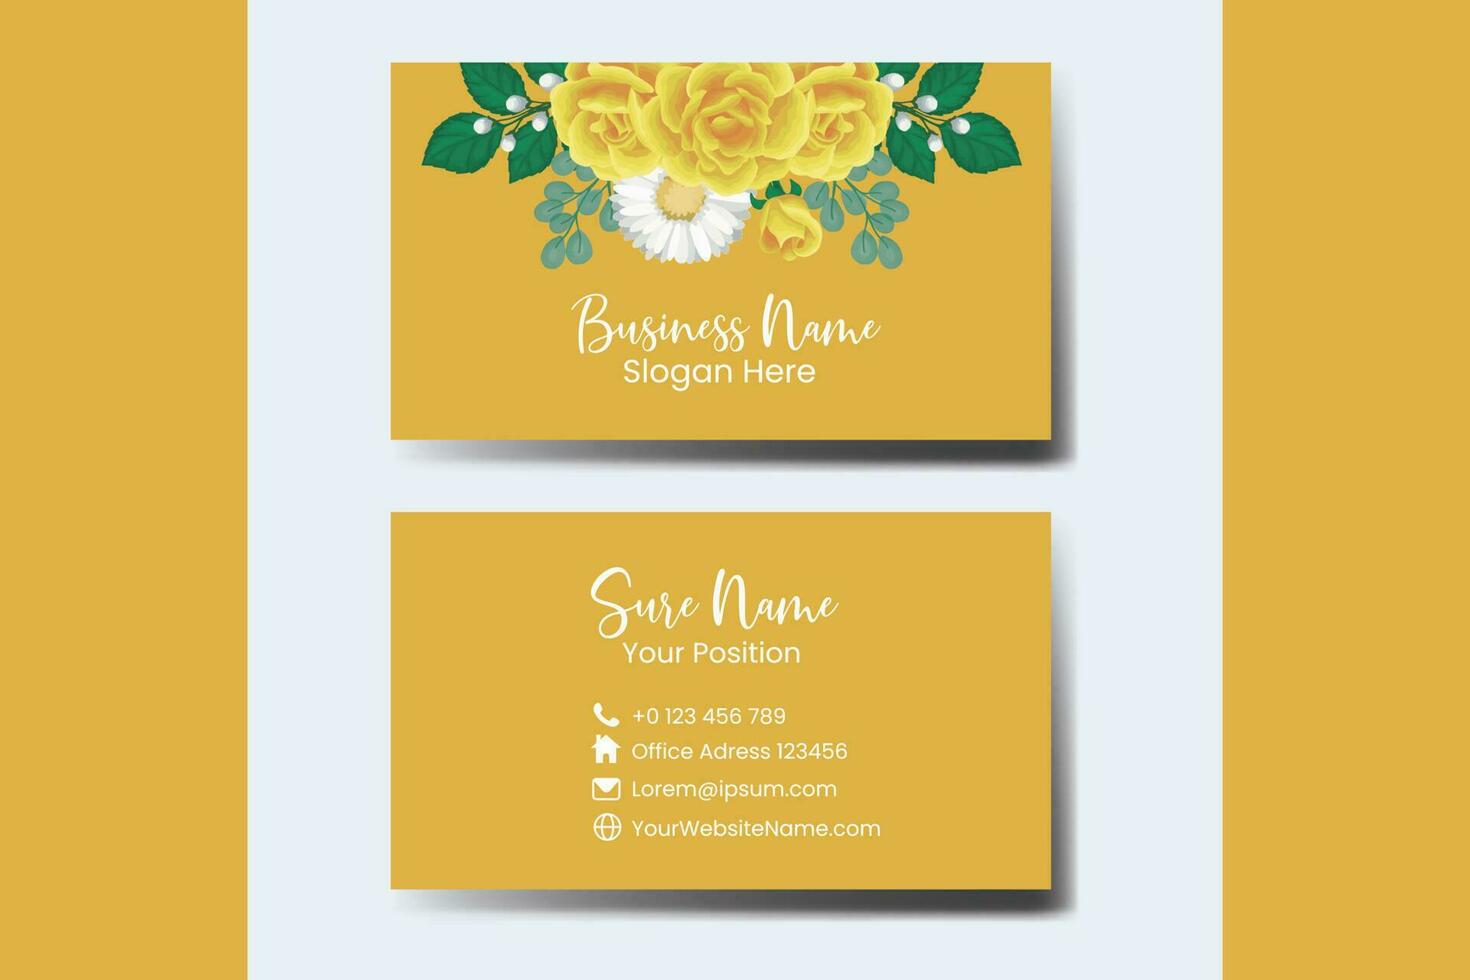 Business Card Template Yellow Rose Flower .Double-sided Blue Colors. Flat Design Vector Illustration. Stationery Design